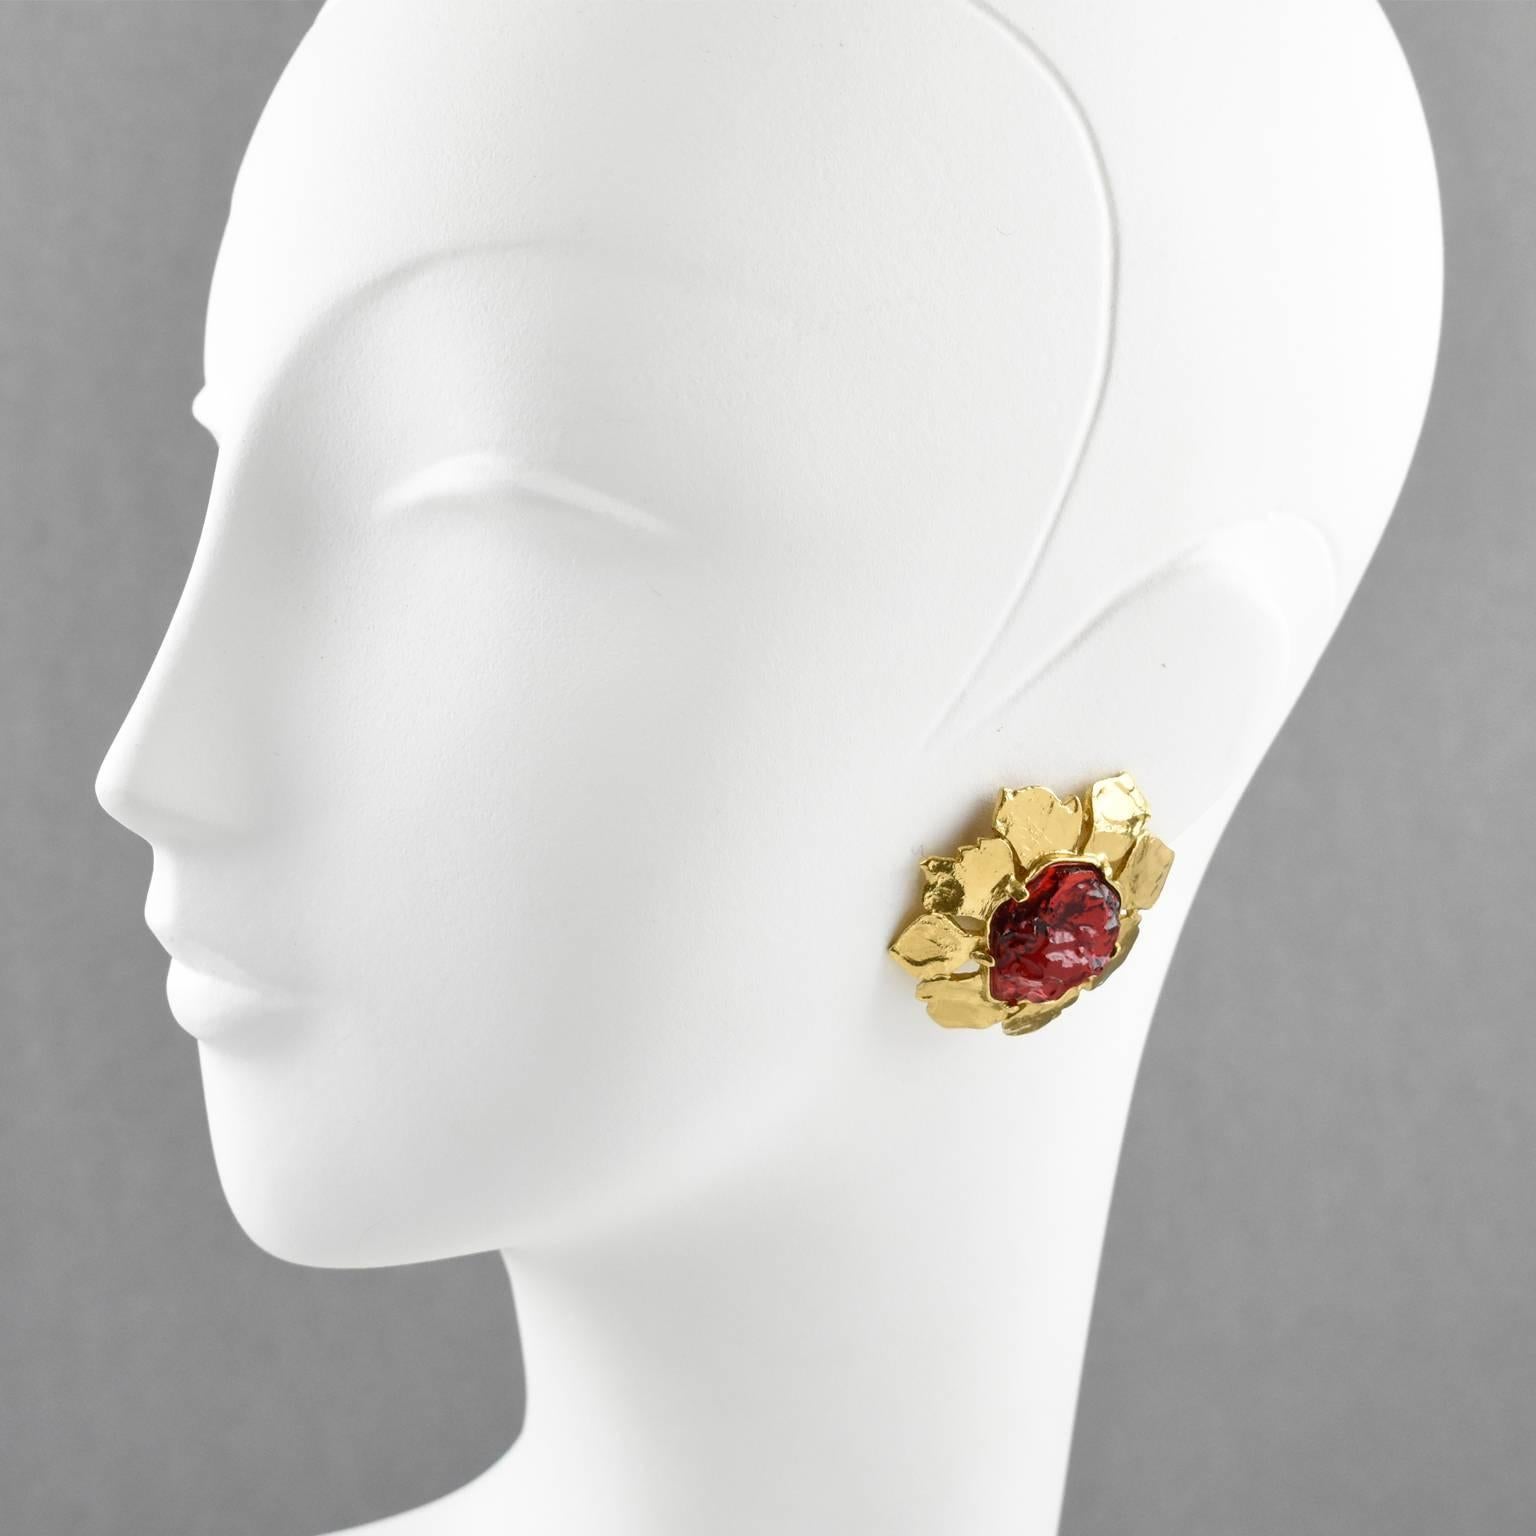 Romantic Yves Saint Laurent YSL Paris clip-on earrings. Elegant gilt metal floral shape, metal all textured with hand-made feel compliment with ruby red textured resin cabochon rhinestone. Signed at the back 'YSL Made in France'. 
Measurements: 1.69